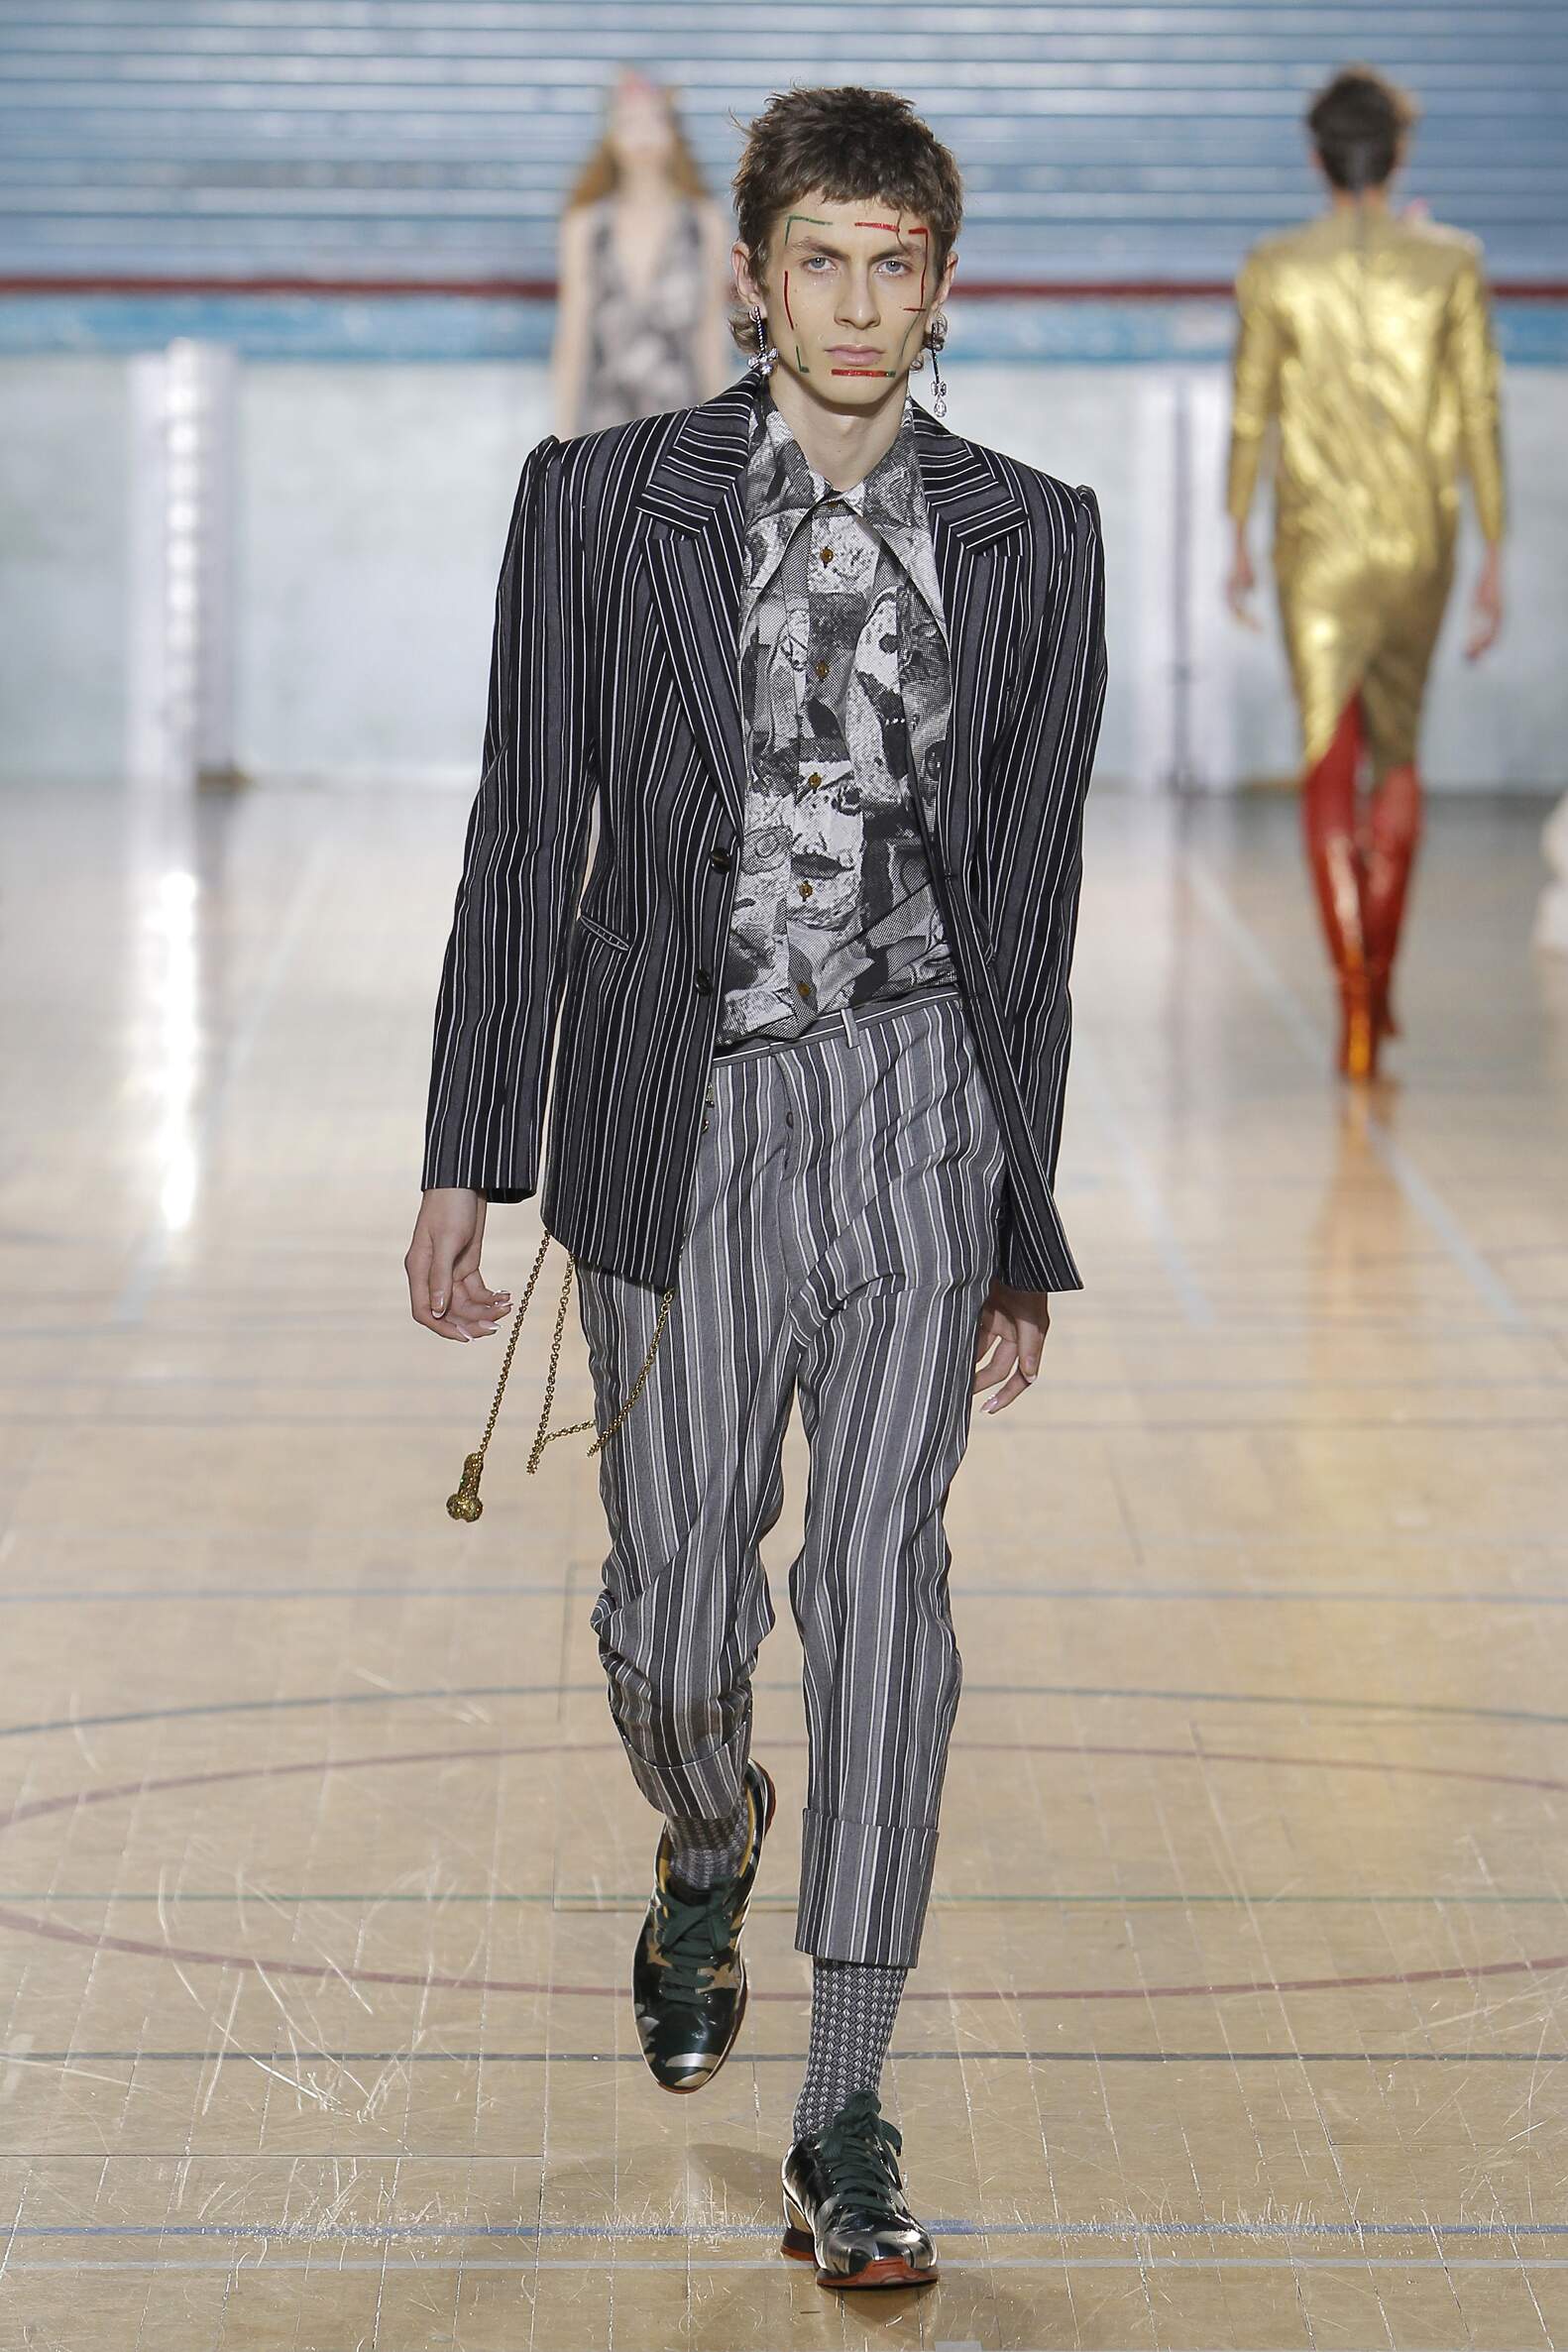 VIVIENNE WESTWOOD FALL WINTER 2017-18 COLLECTION | The Skinny Beep